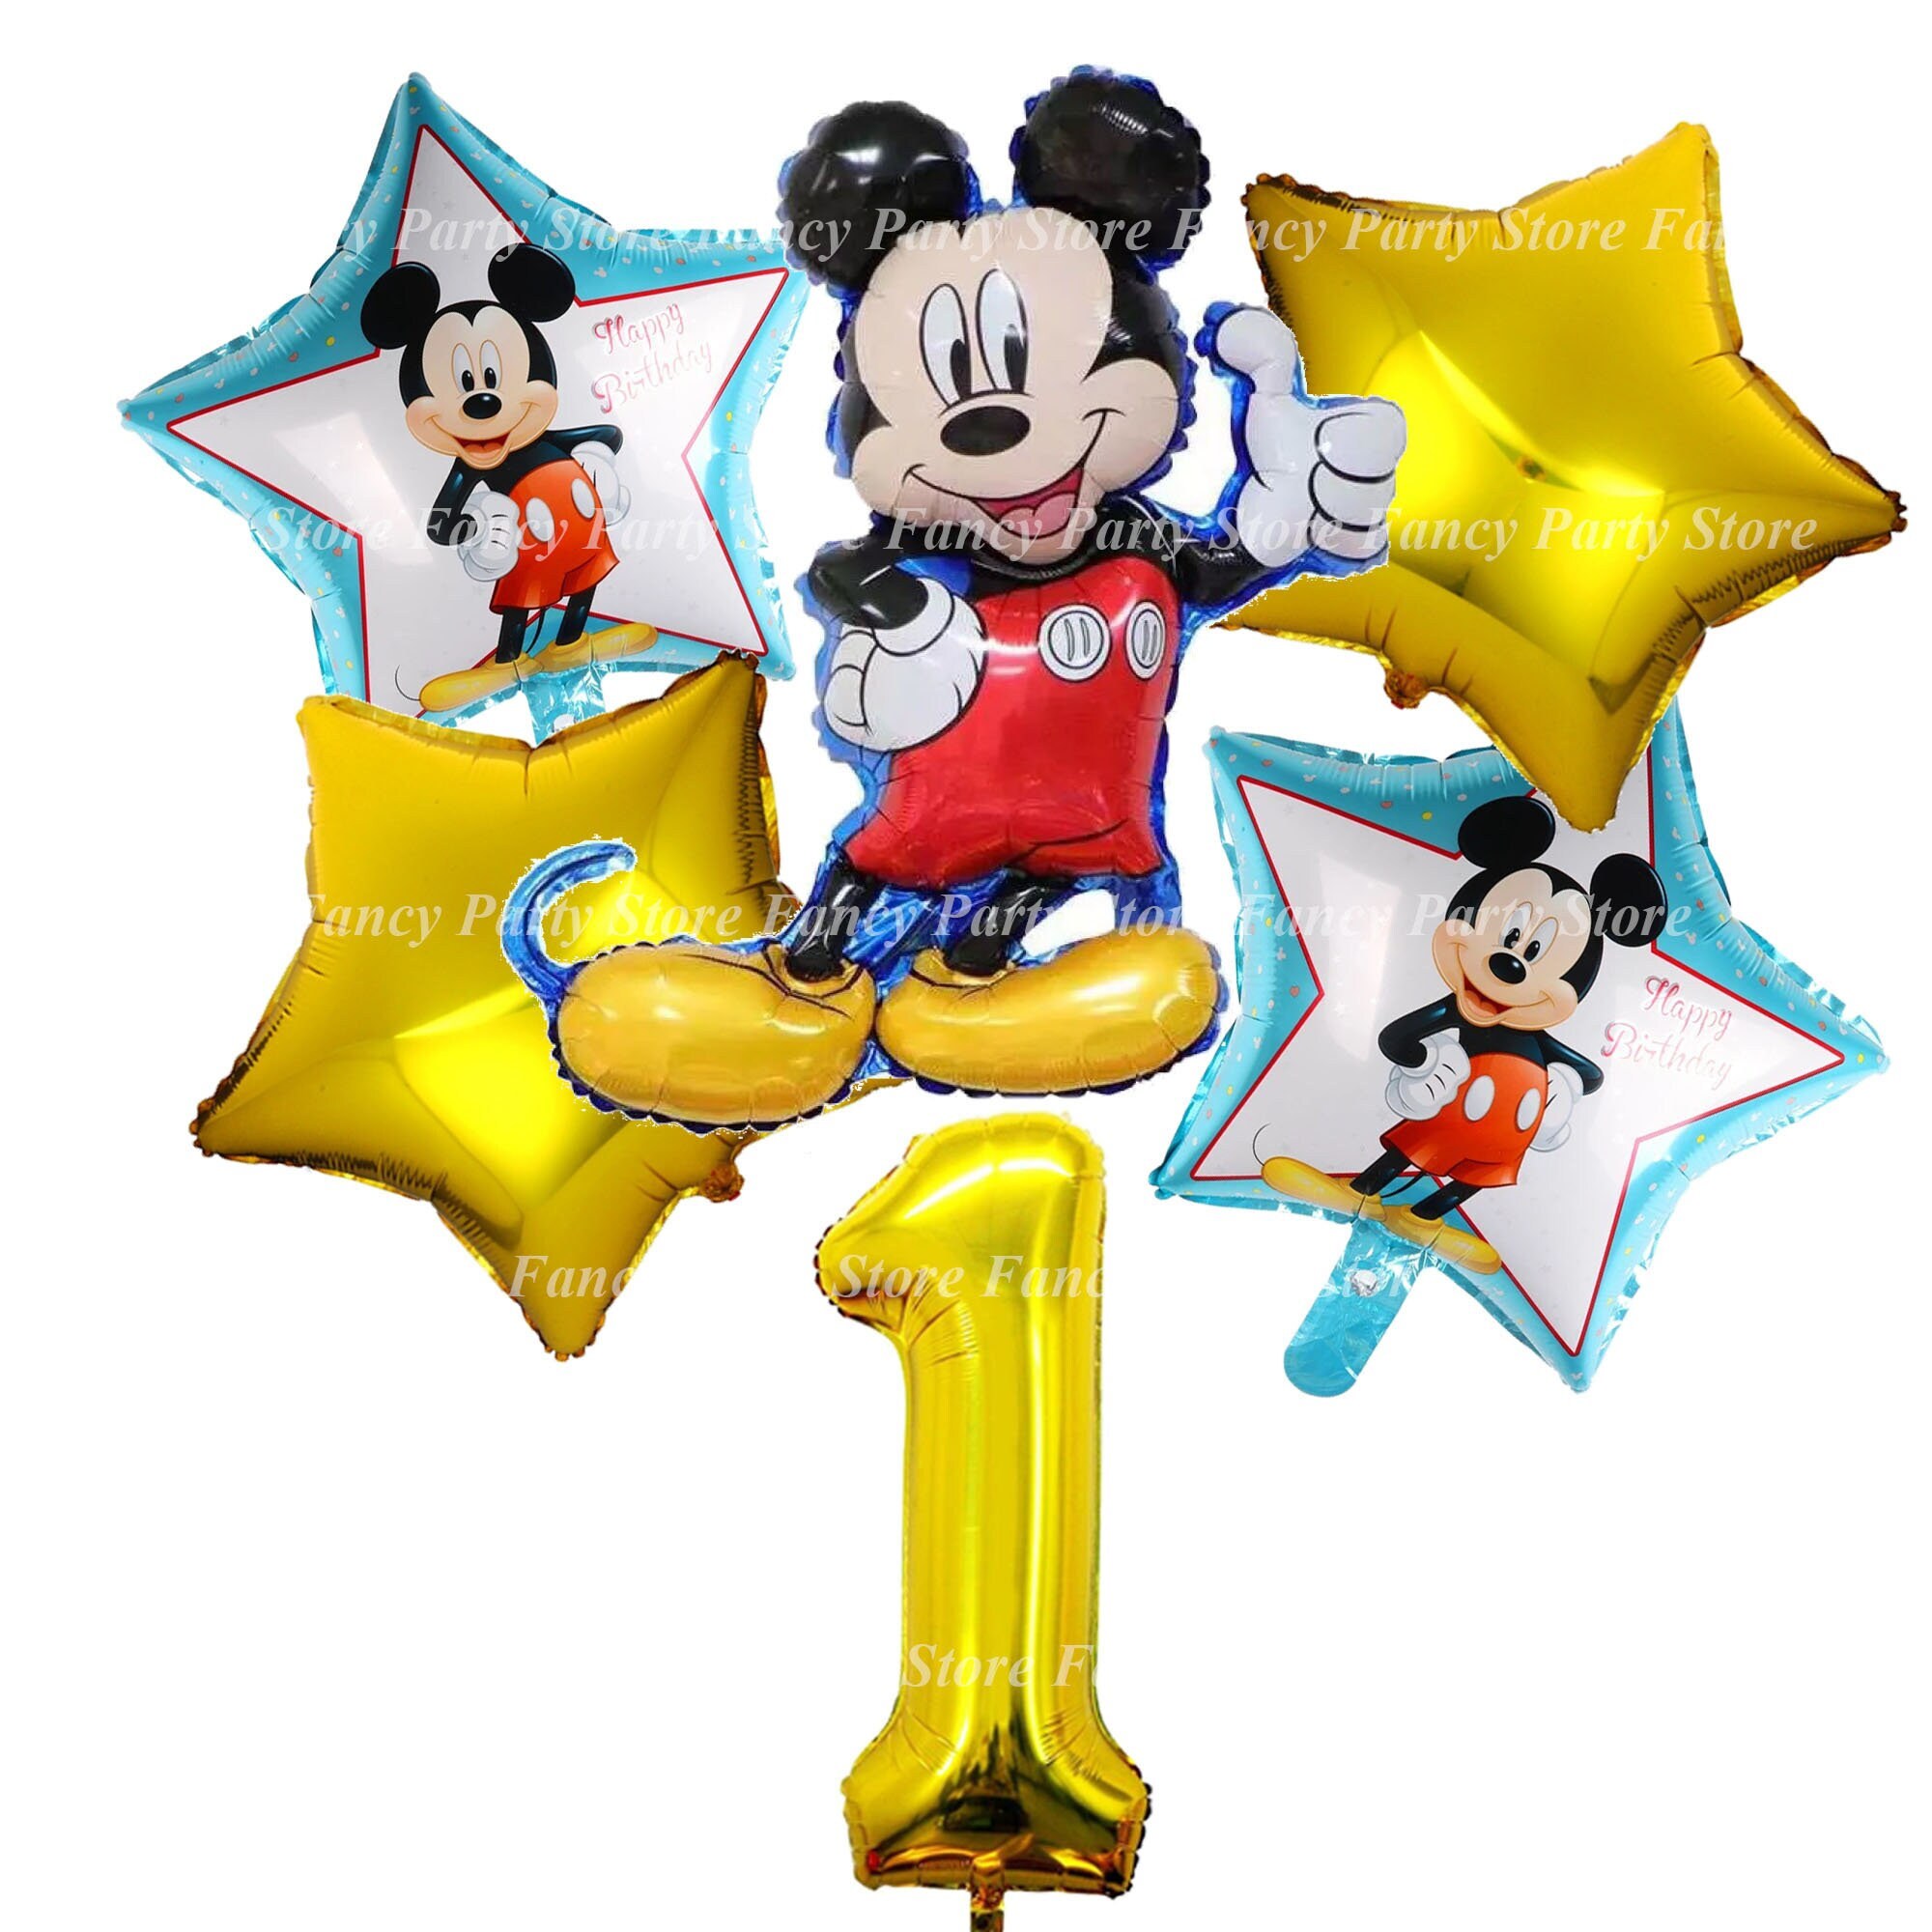 Ochooy Balloon Mickey The Mouse Birthday Party Decorations, Mickey Themed Party Supplies Set for Girl’s/Boy’s with Balloons Garland Kit, Mickey